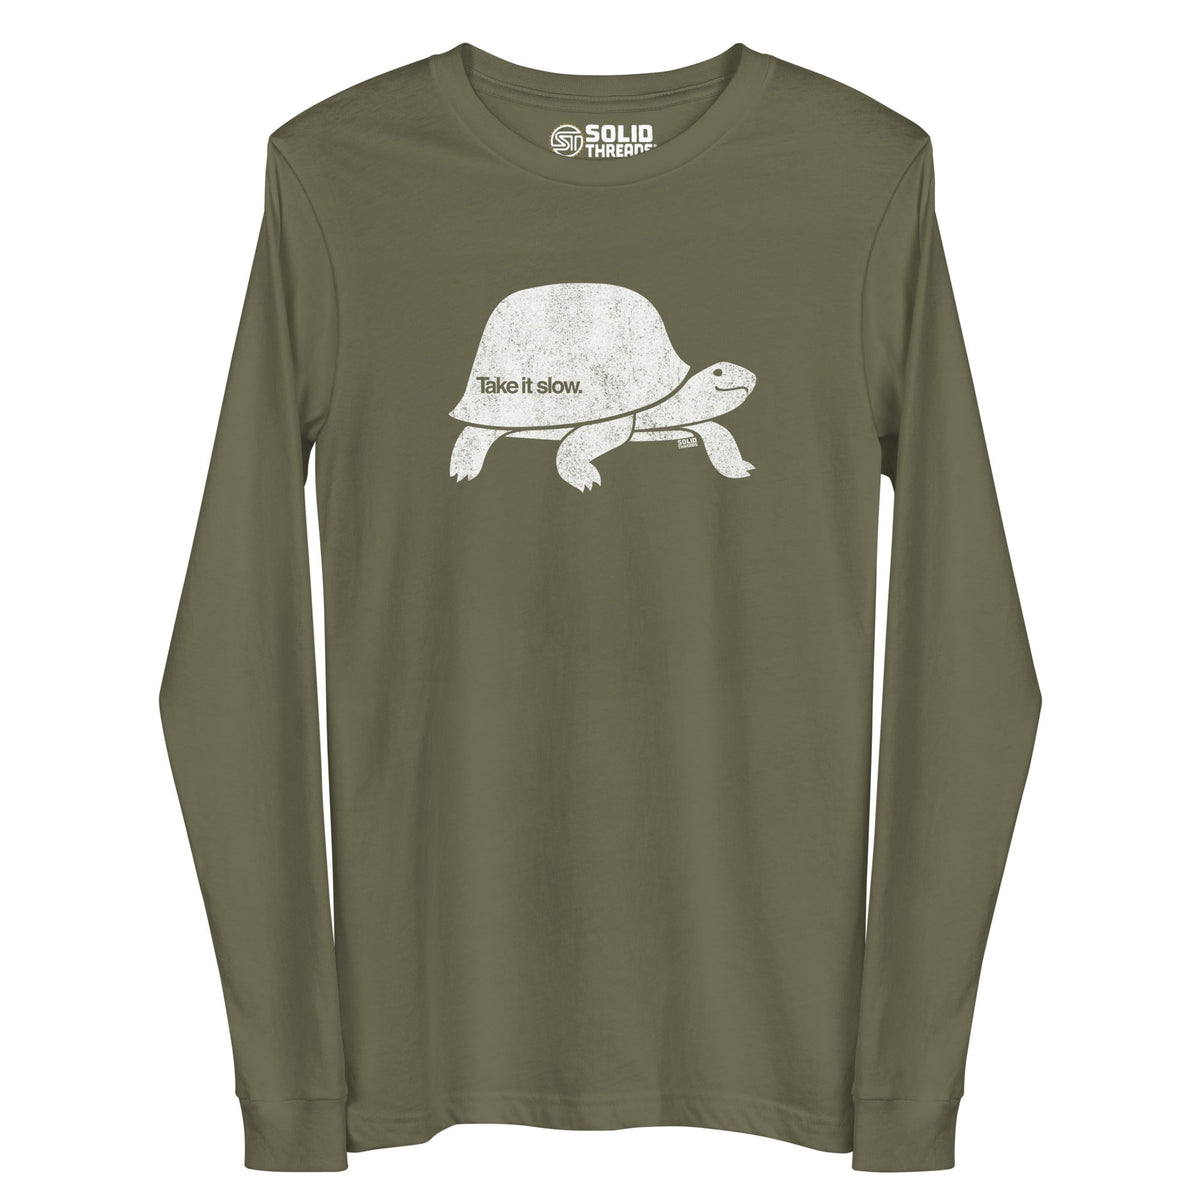 Take It Slow Vintage Graphic Long Sleeve Tee | Funny Turtle T-Shirt | Solid Threads